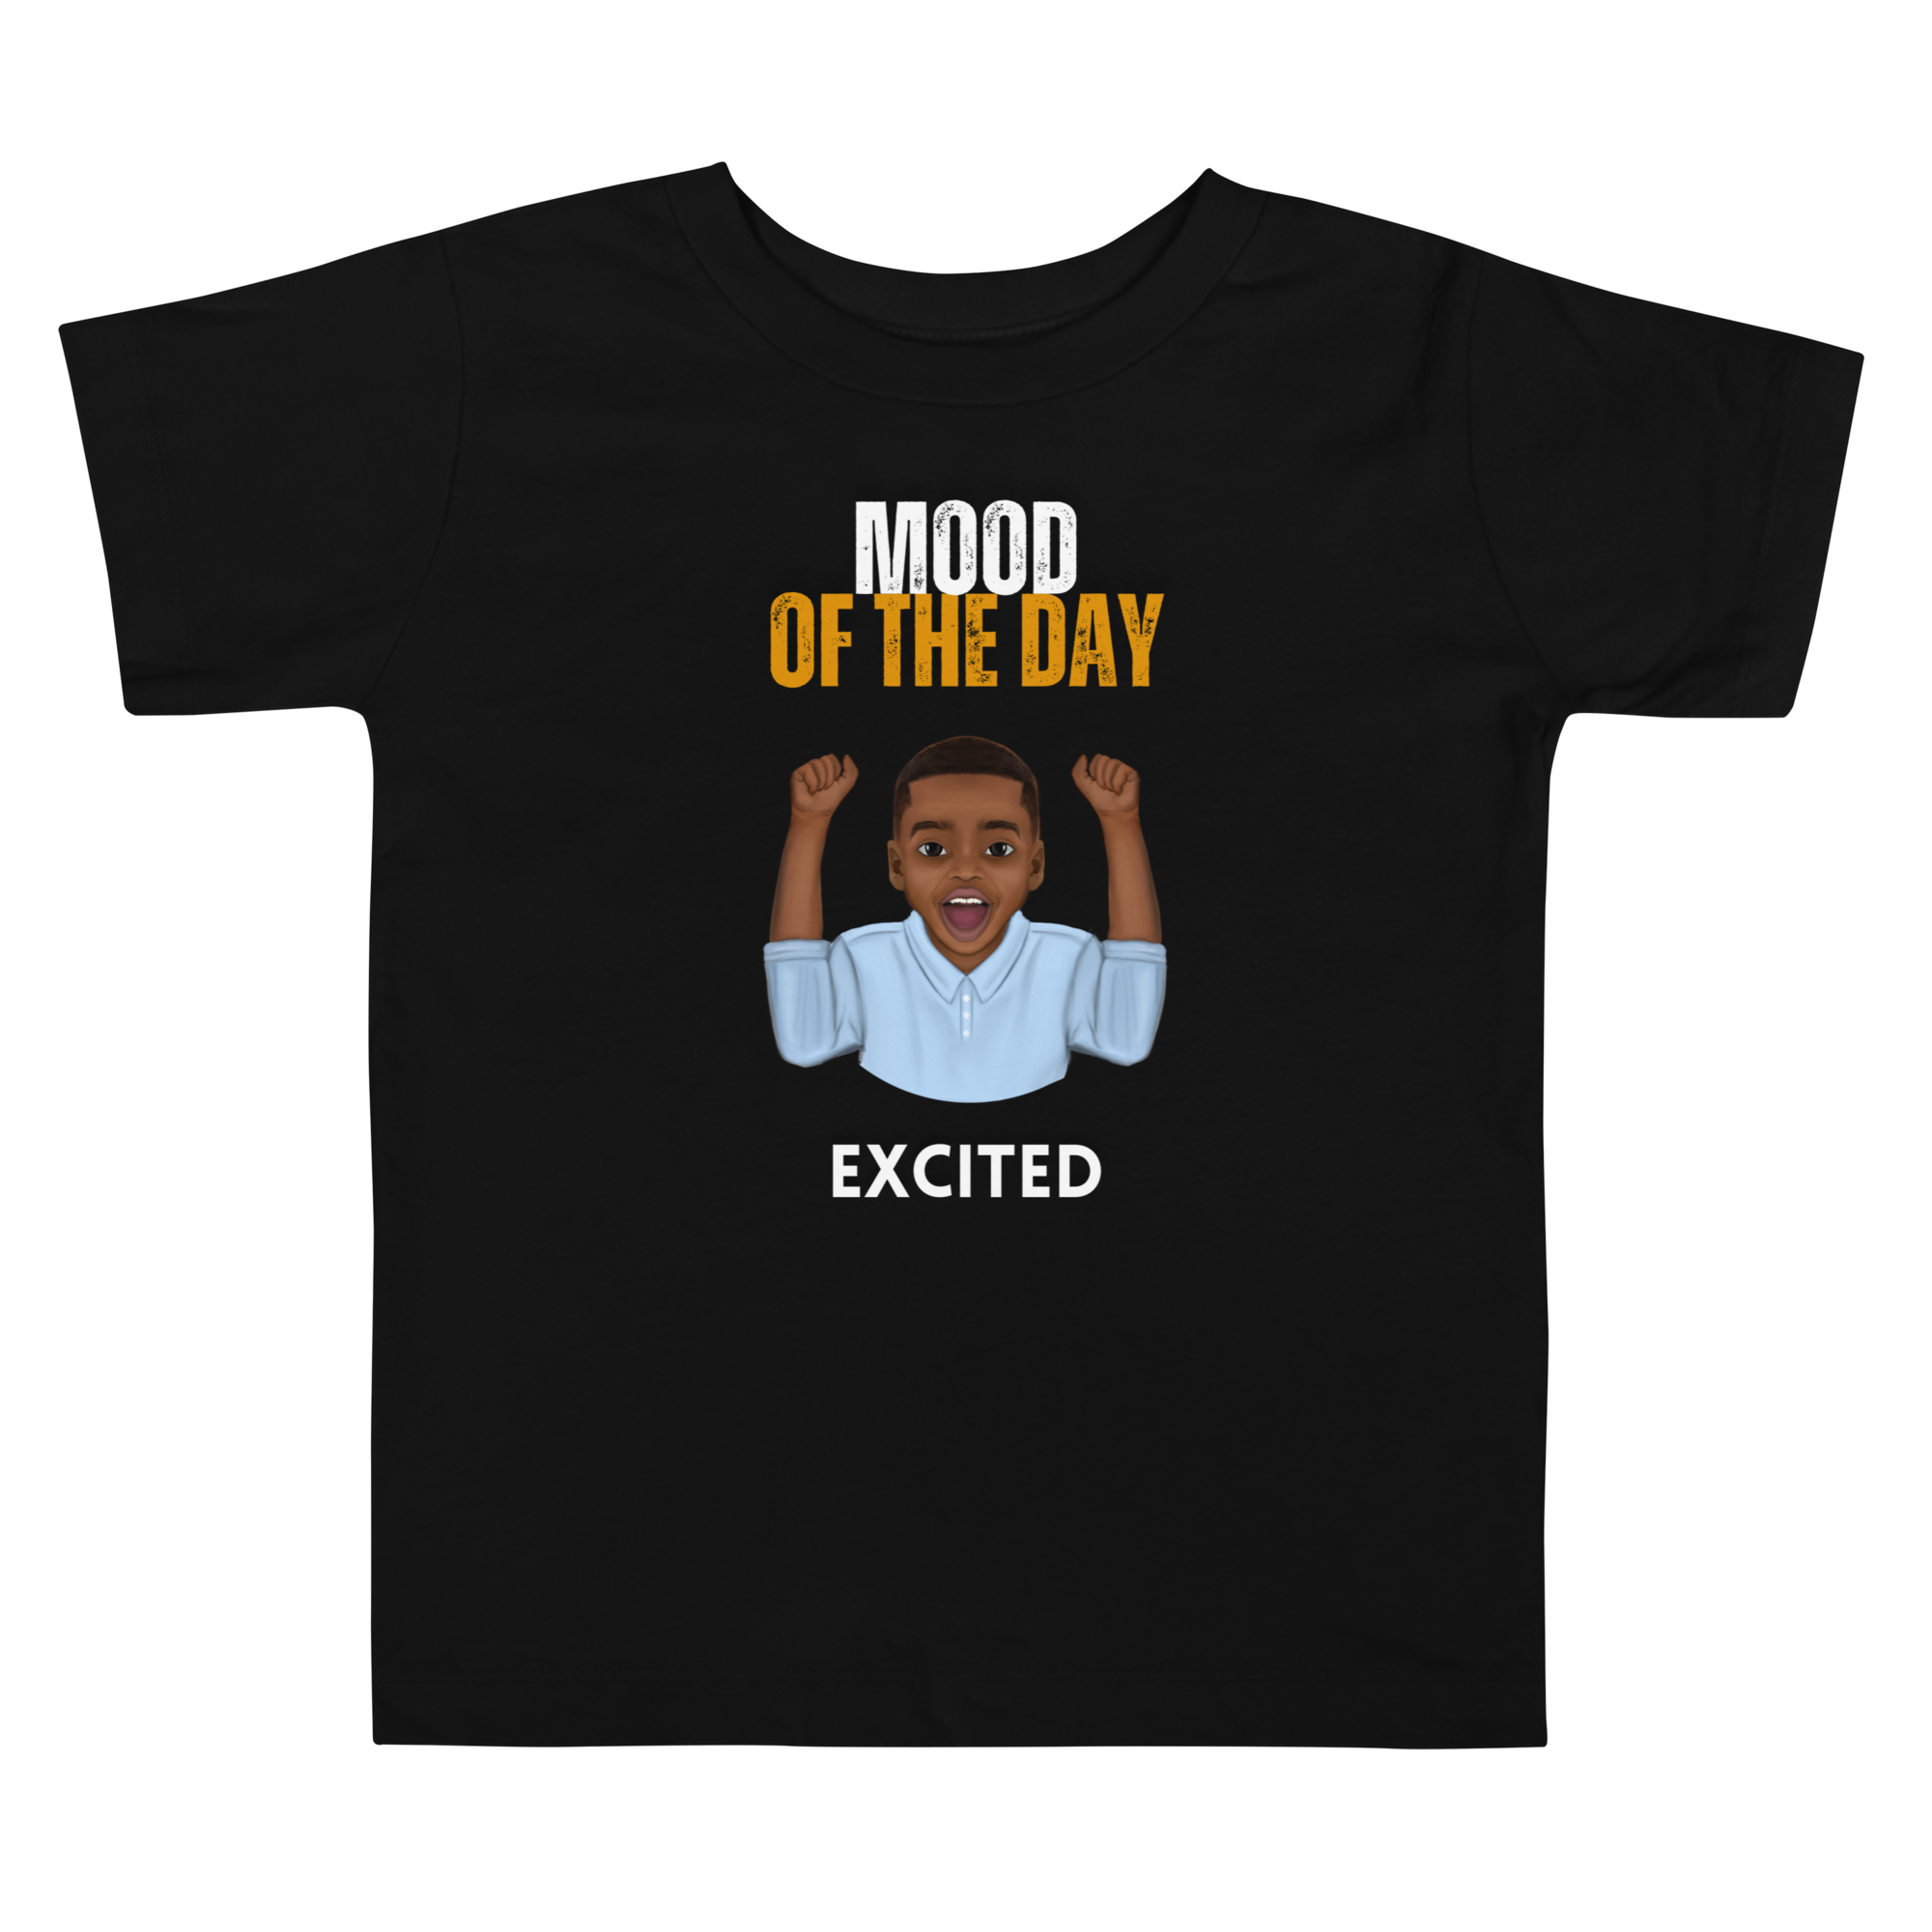 Toddler Mood of the Day T-shirt - Excited